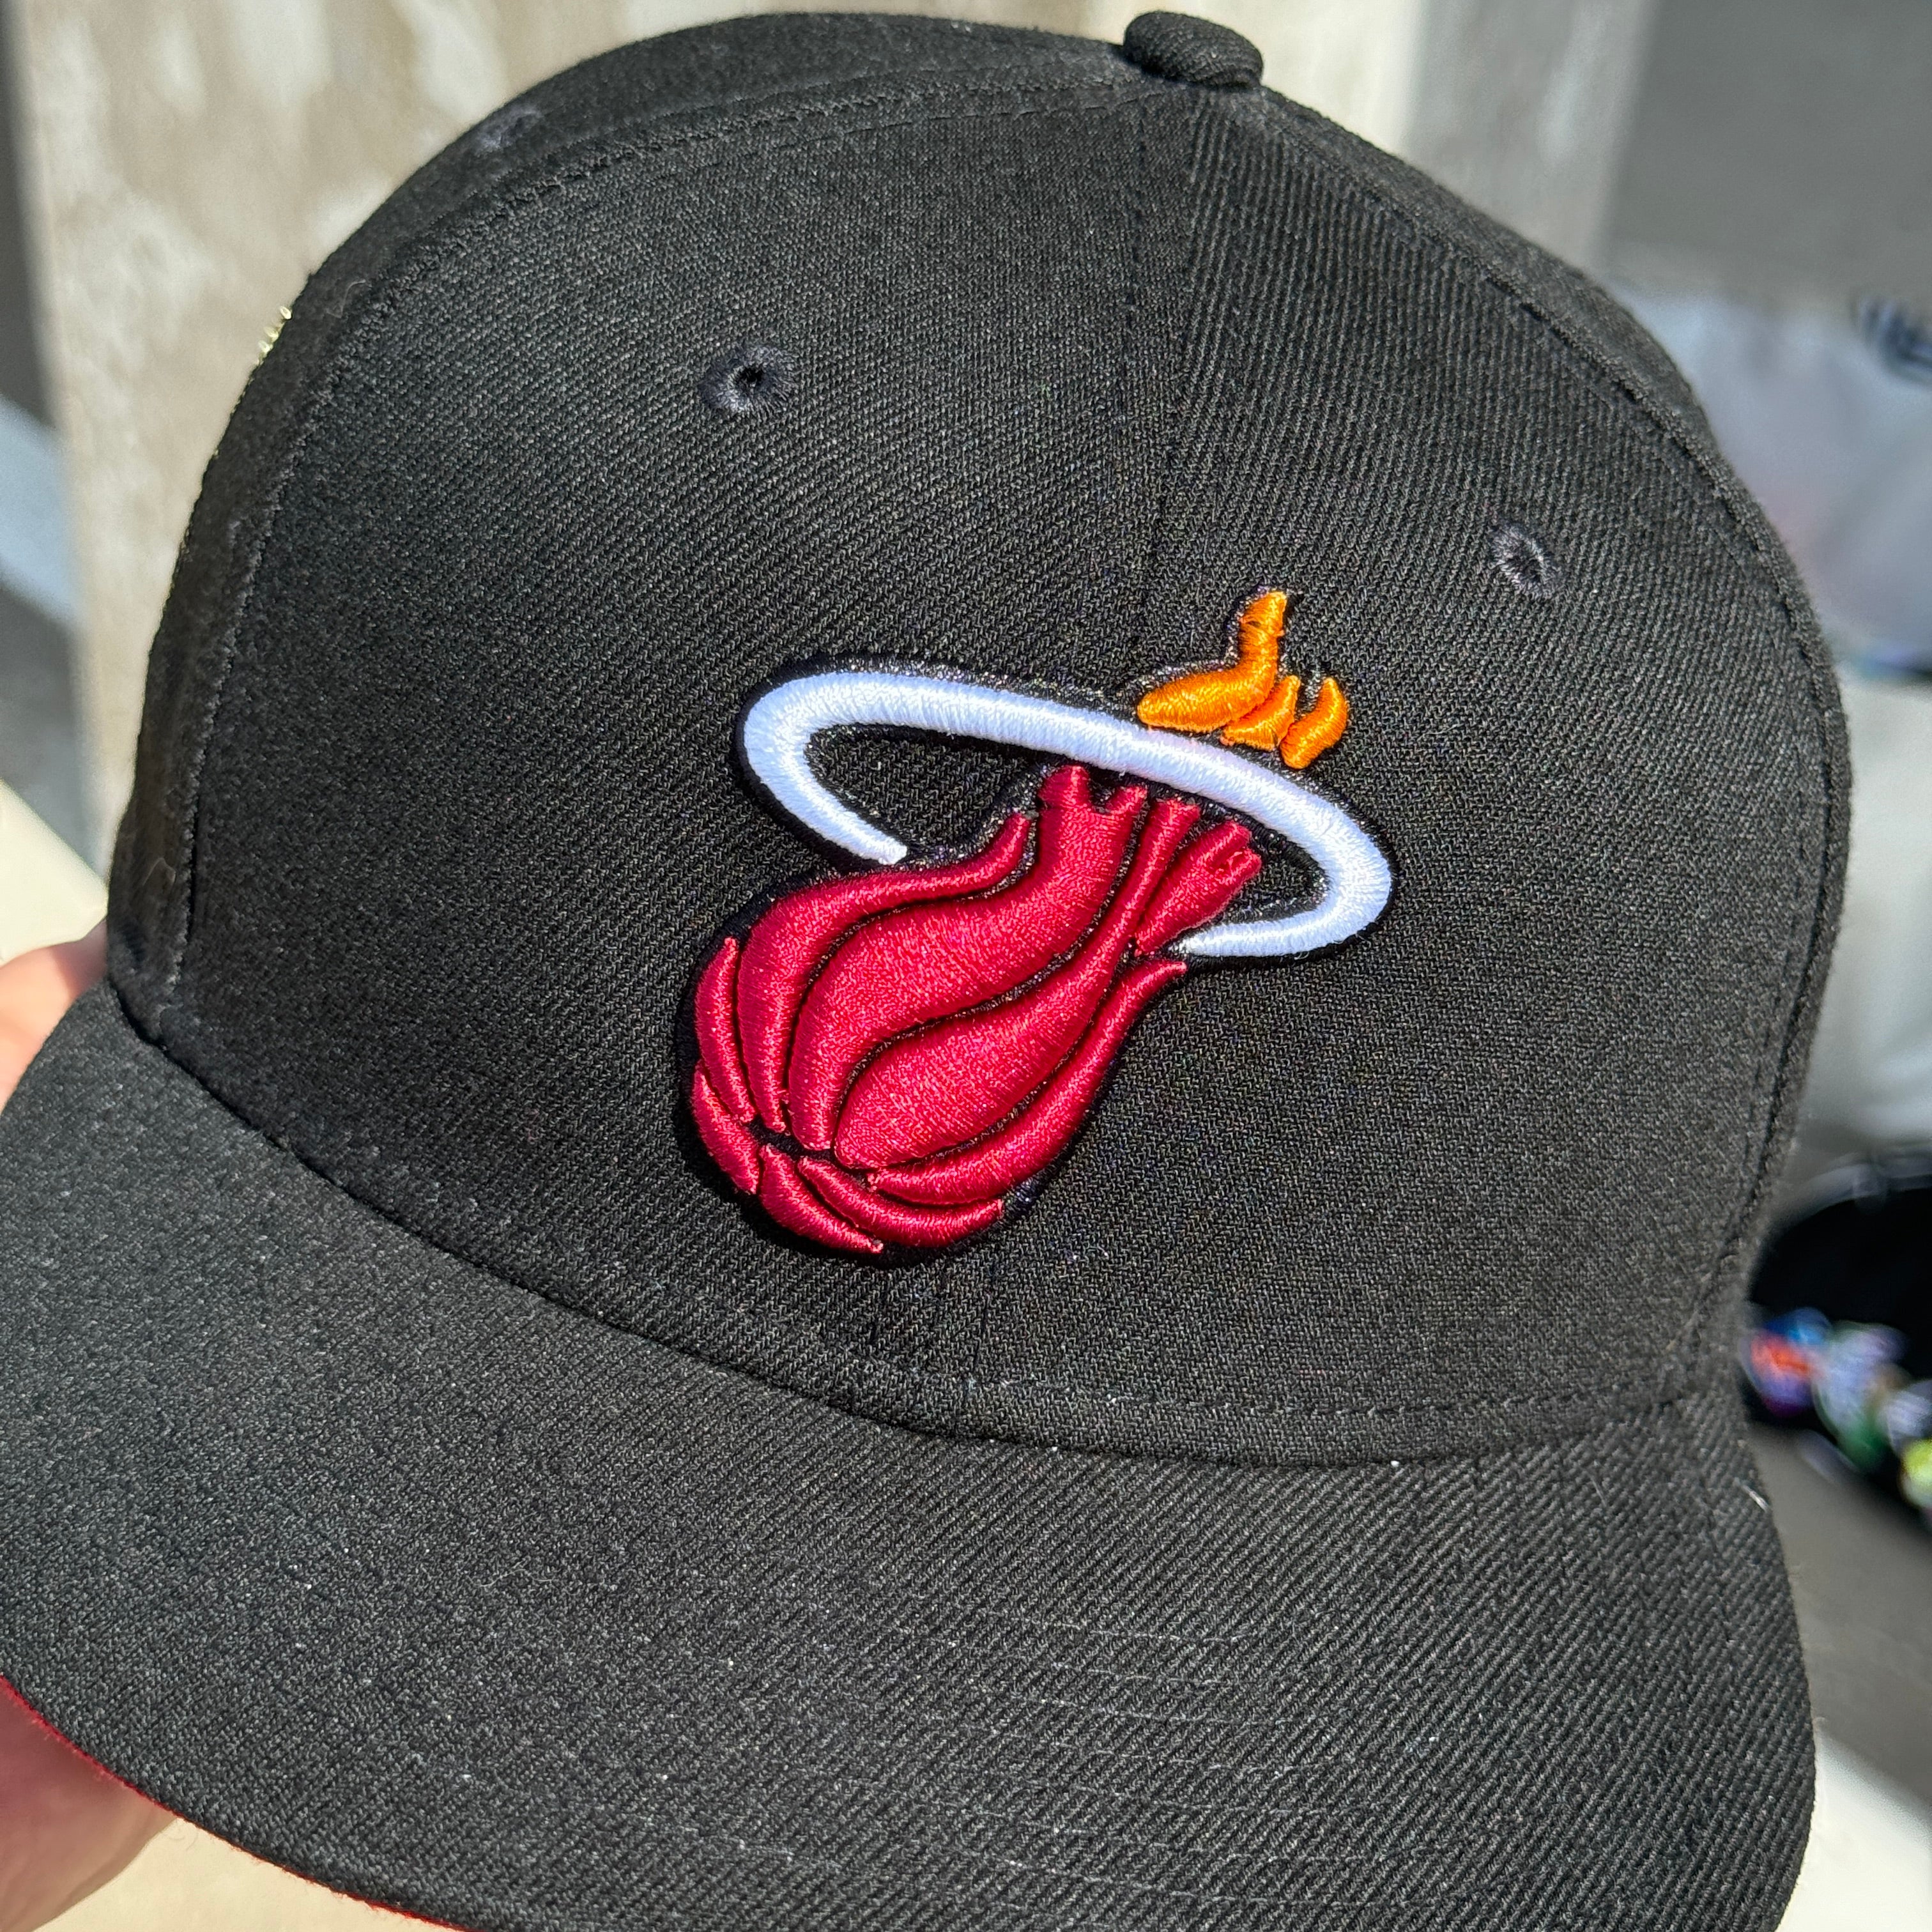 USED 1/8 Black Miami Heat Gold Trophy 59fifty New Era Fitted Hat Cap